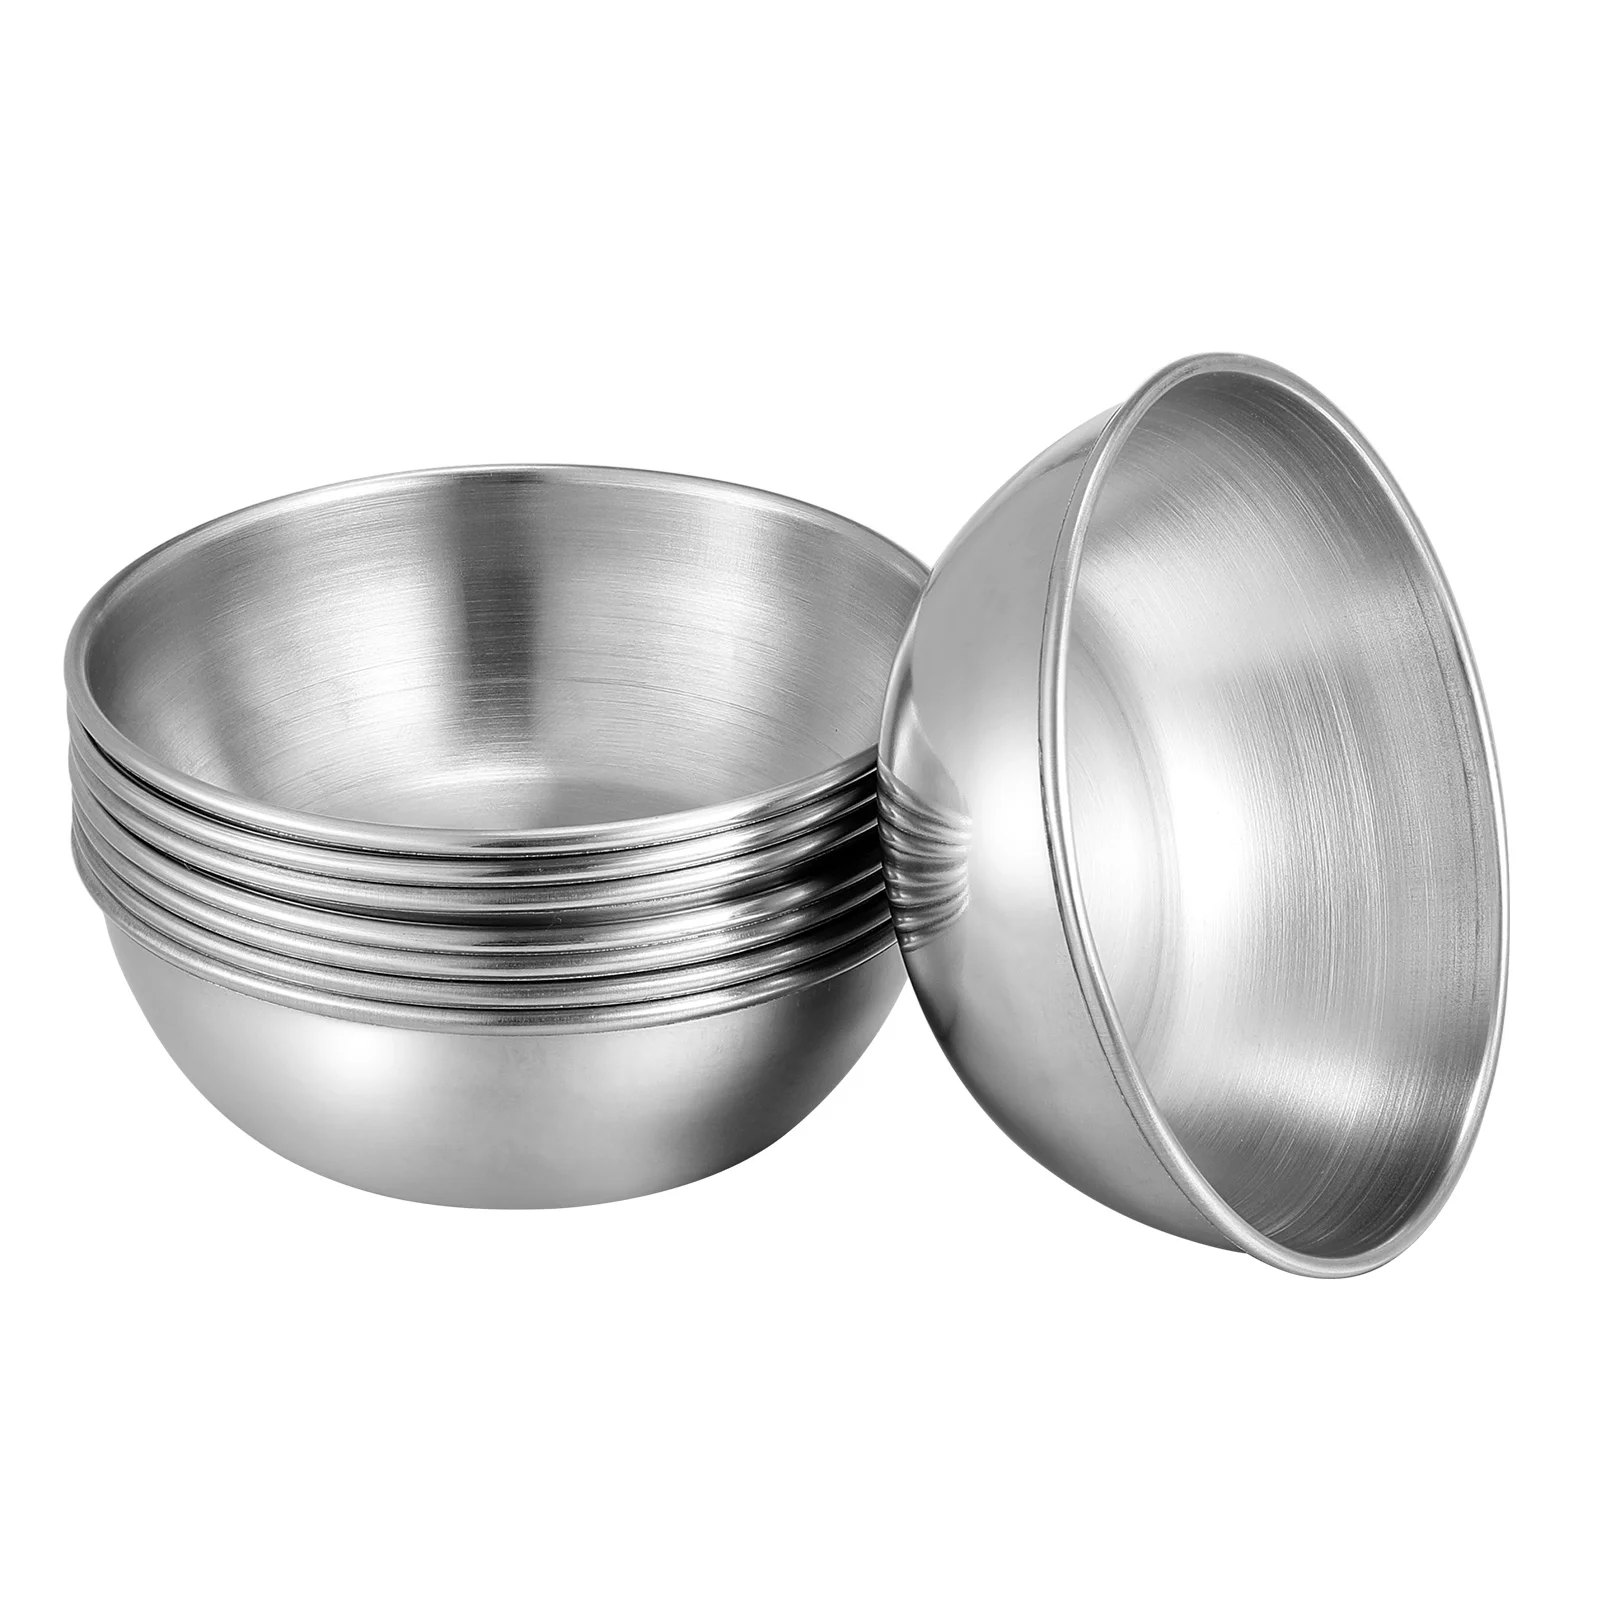 

8Pcs Dipping Bowls Stainless Steel Sauce Dishes Round Seasoning Dish Saucer Appetizer Serving Plates for Restaurant Home